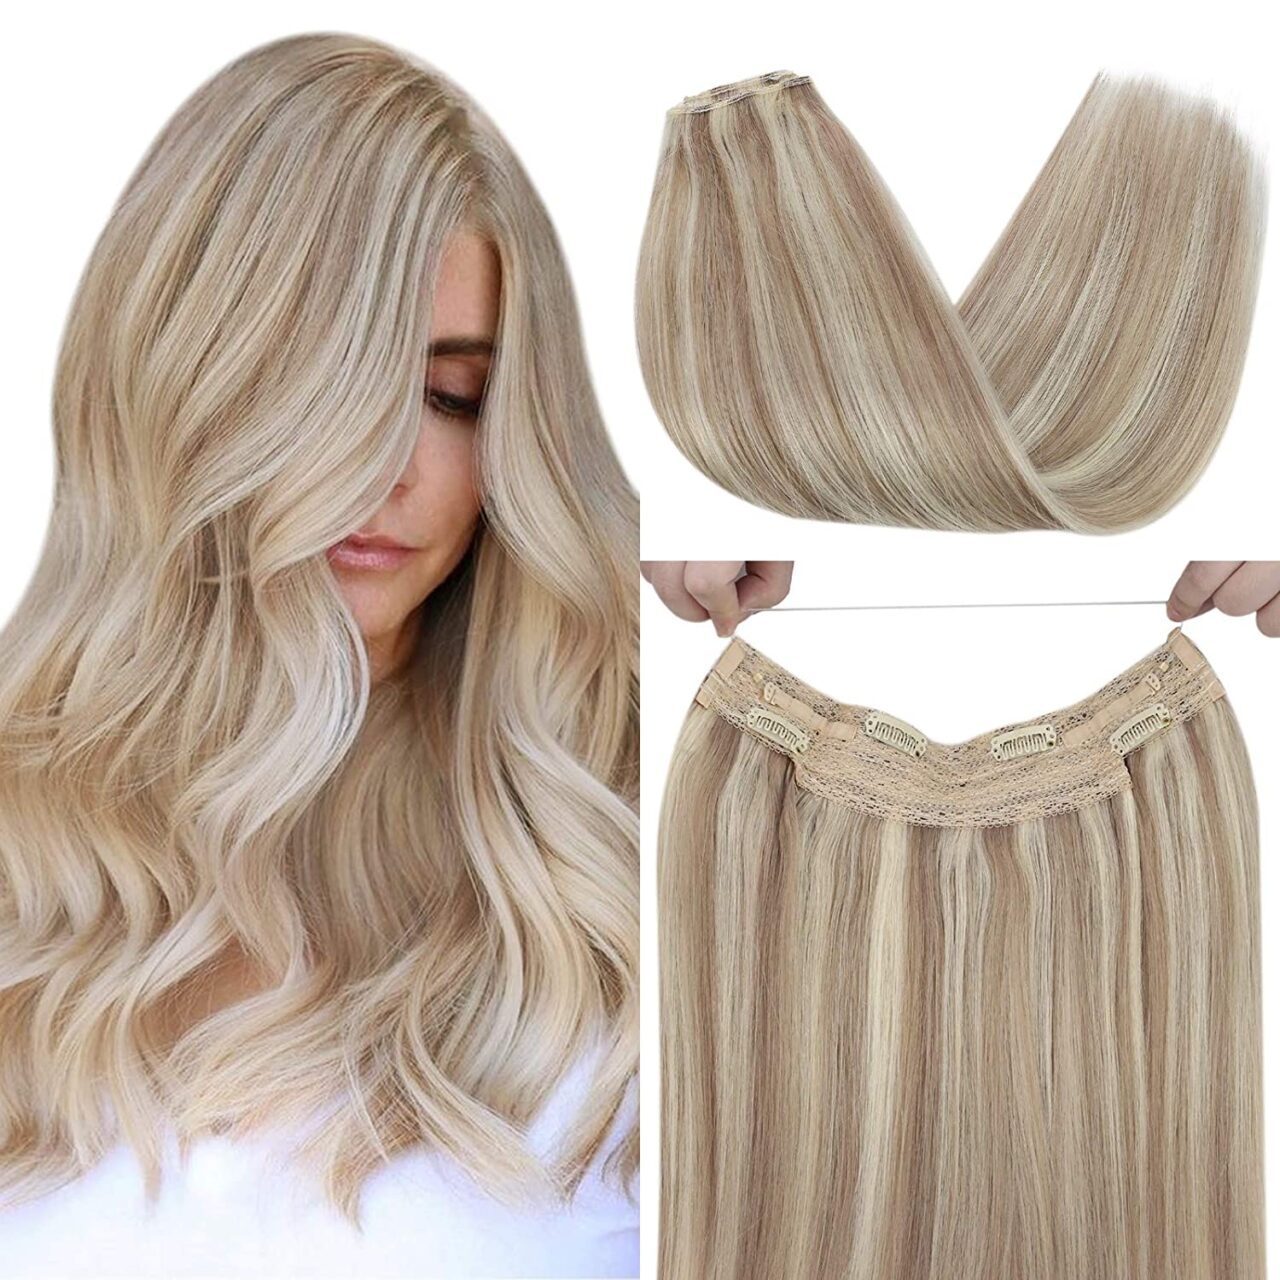 Start Your Online Business with Halo Hair Extension